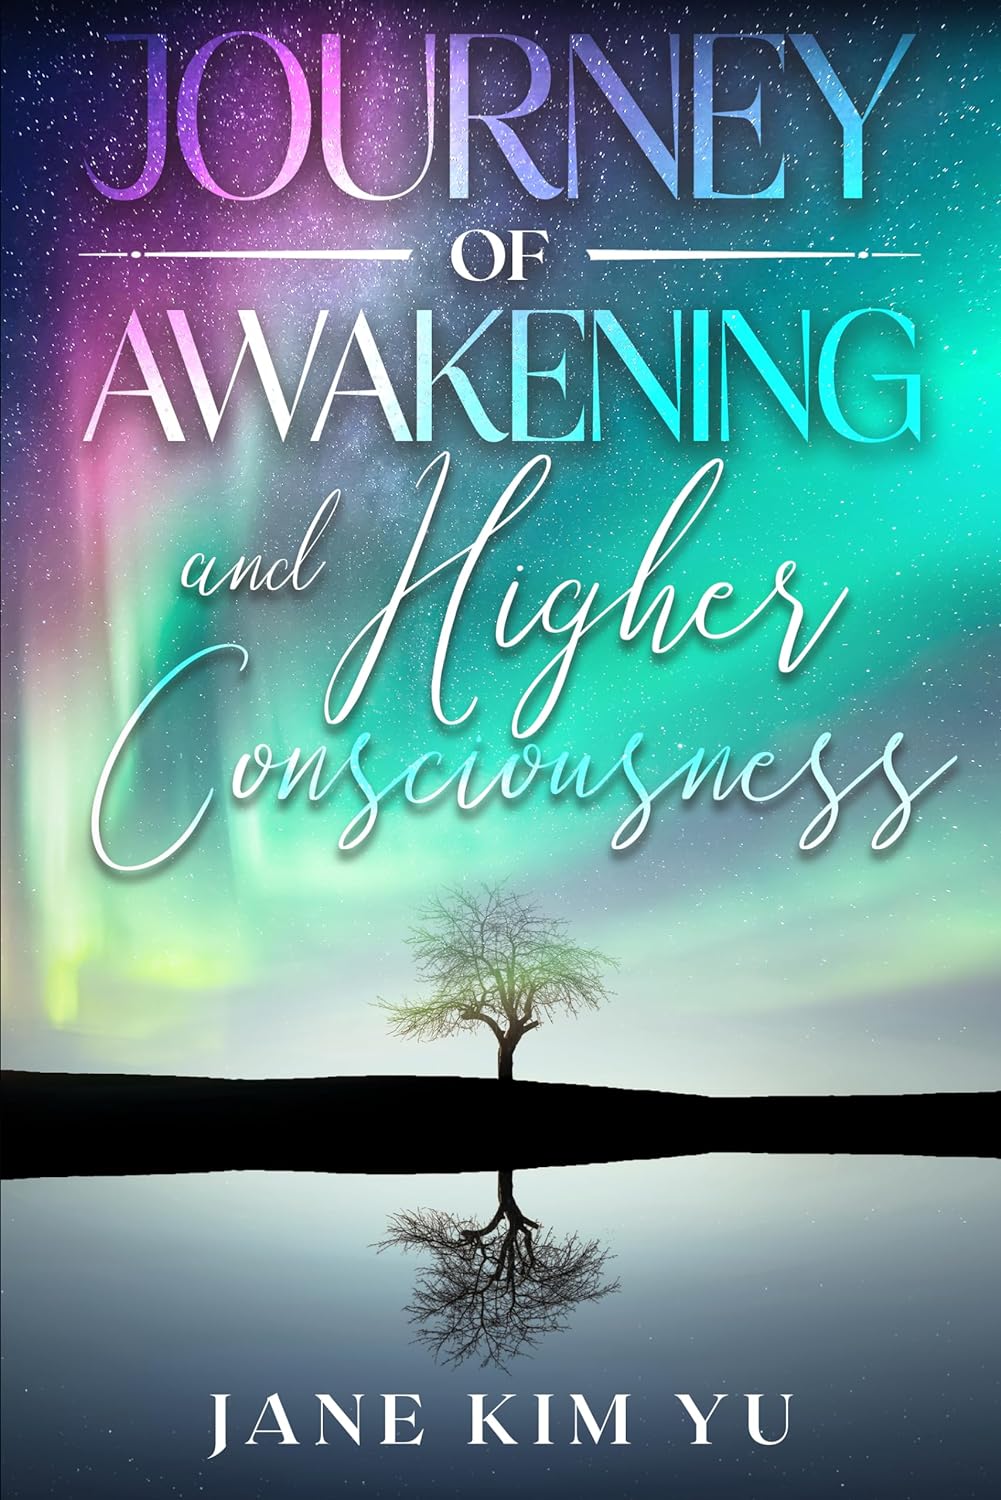 Jane Kim Yu Releases New Book - Journey of Awakening and Higher Consciousness